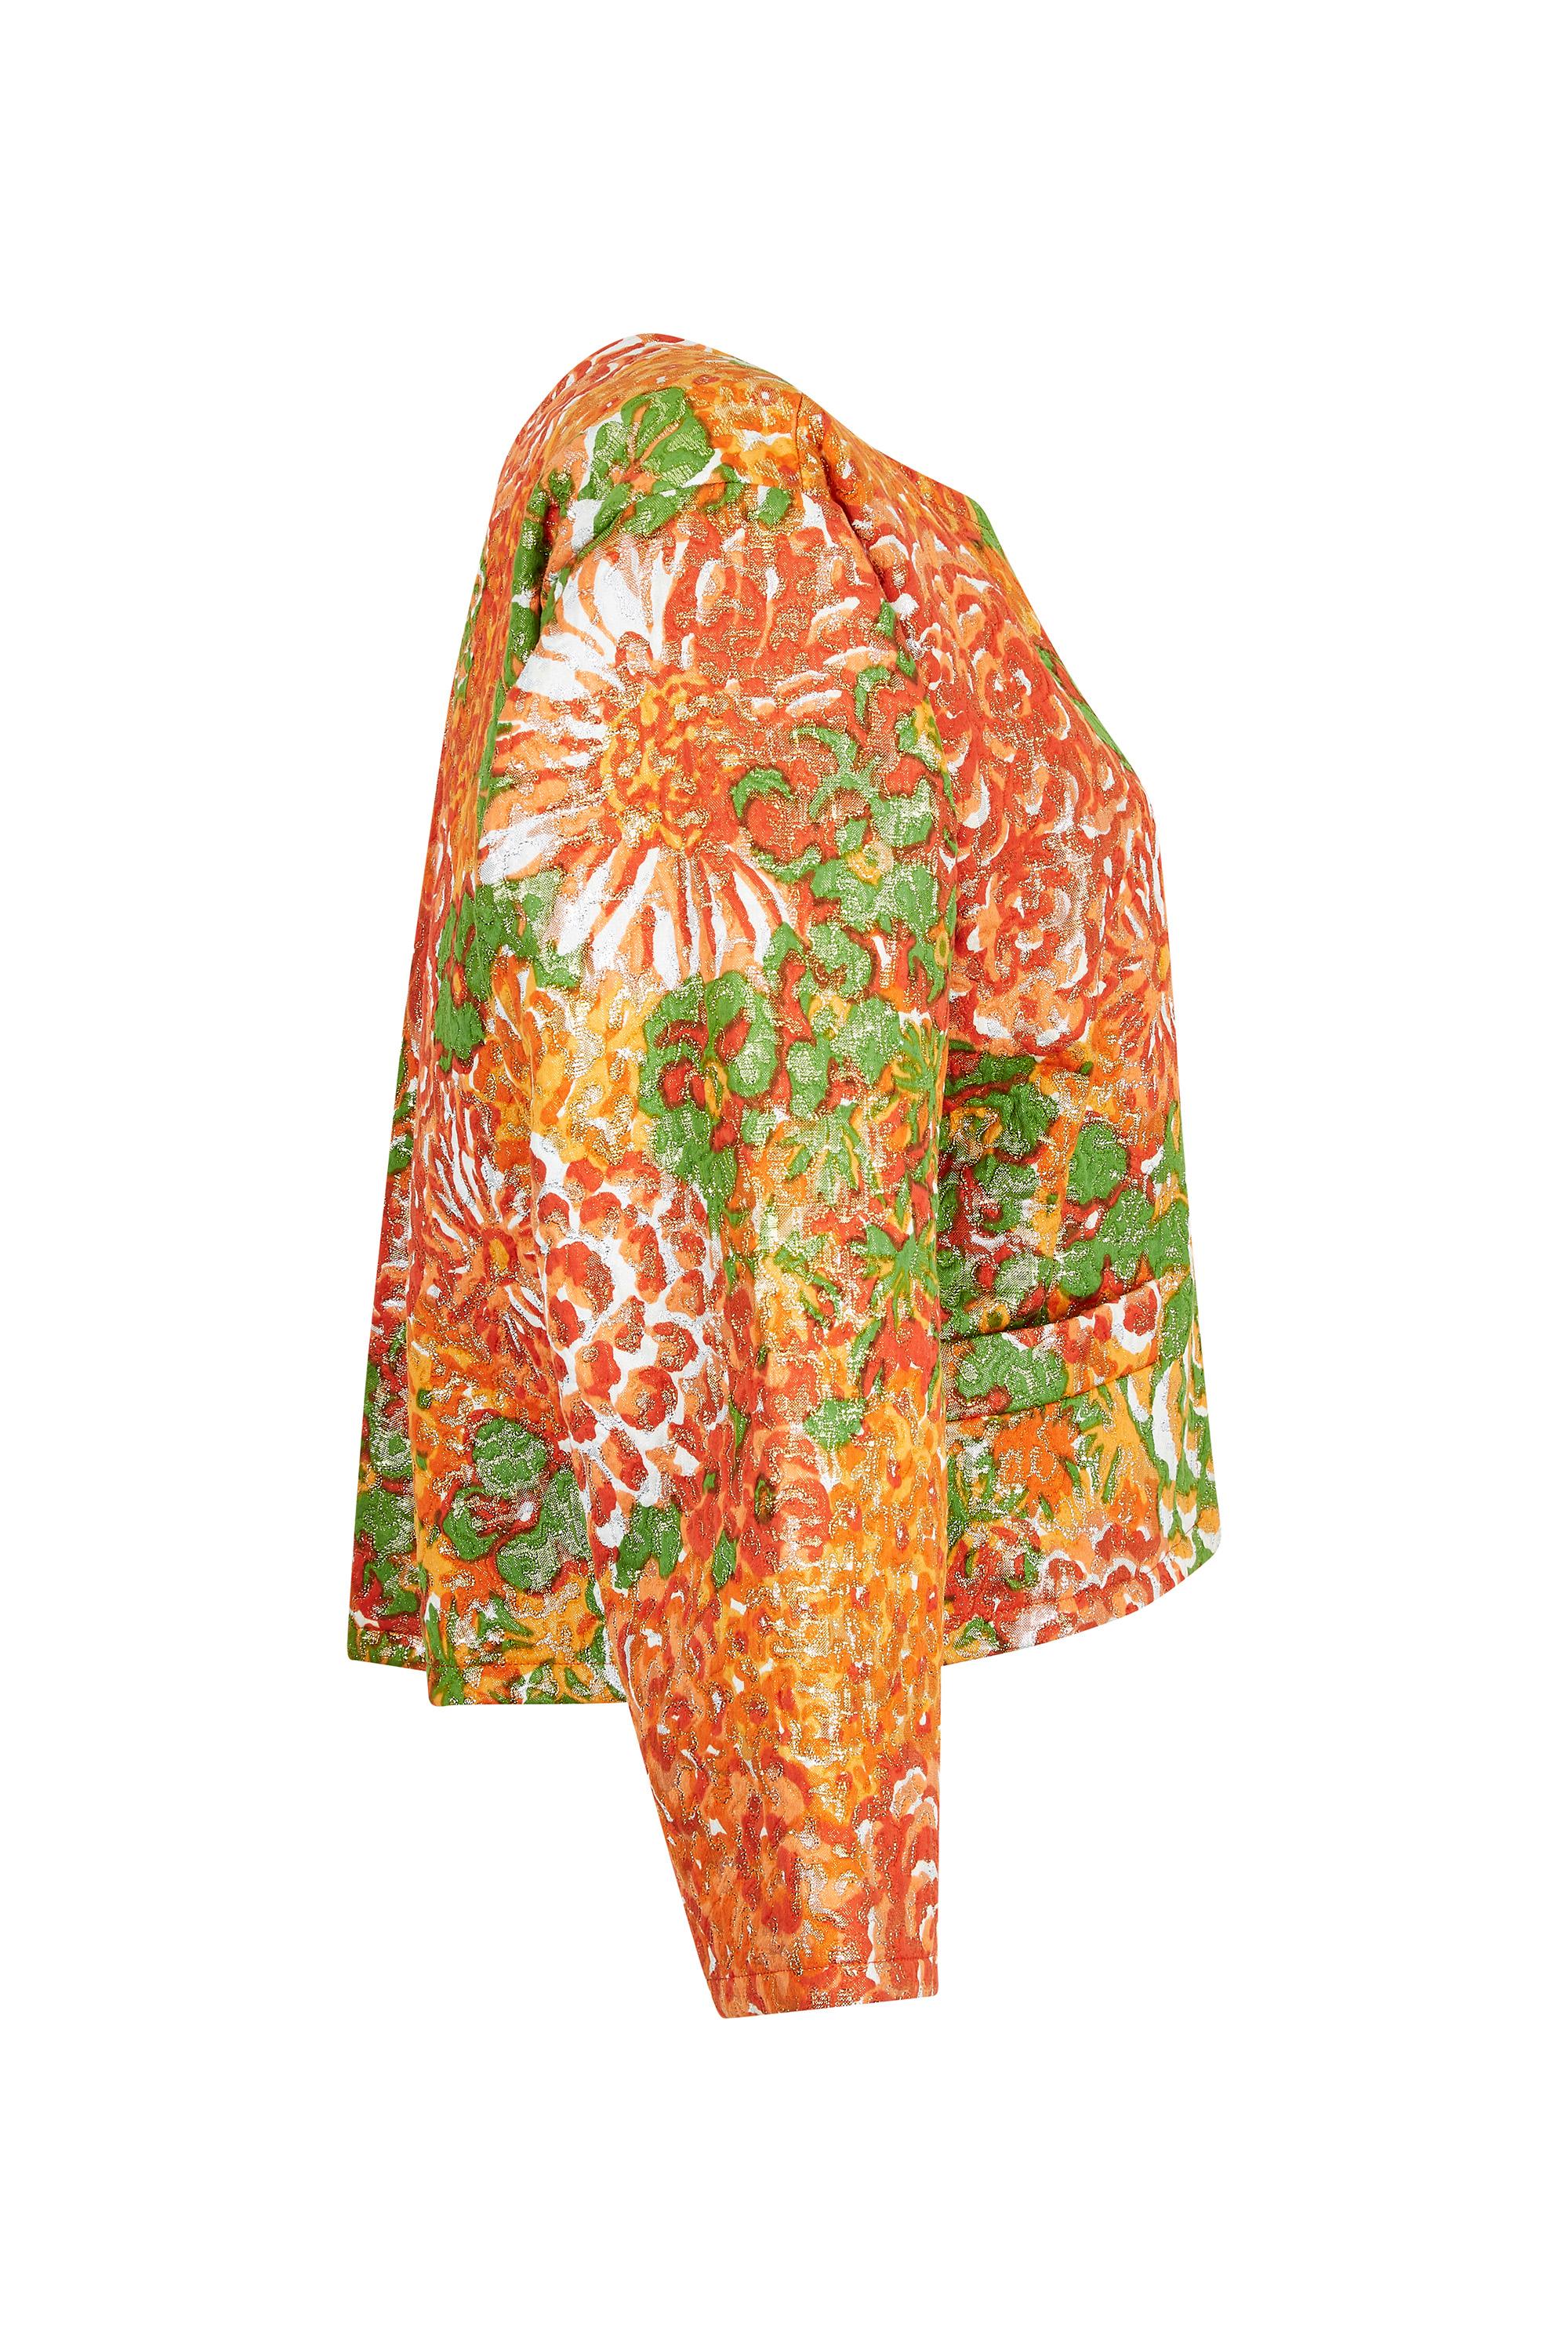 This fabulous 1989 documented lamé floral brocade jacket in tangerine, gold and green is by Yves Saint Laurent, is from a celebrated collection, and is in excellent vintage condition. Designed to be worn open, there are no fastenings and the the